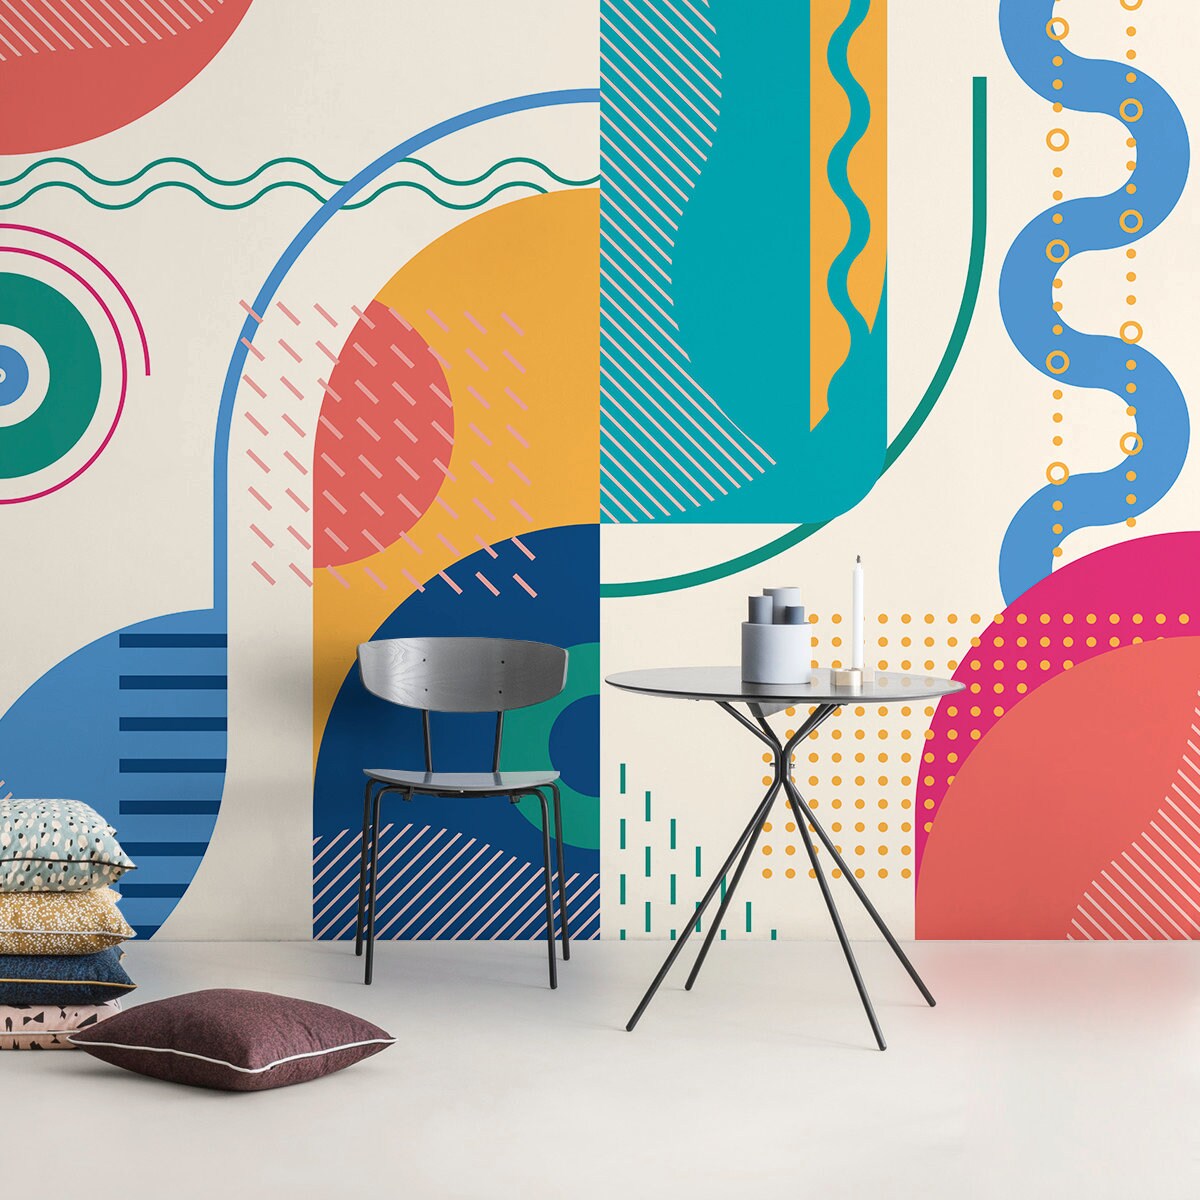 Shapes Colorful Mural Wallpaper Removable Wallpaper Wall Decor Home Decor Wall Art Printable Wall Art Room Decor Wall Prints - B757